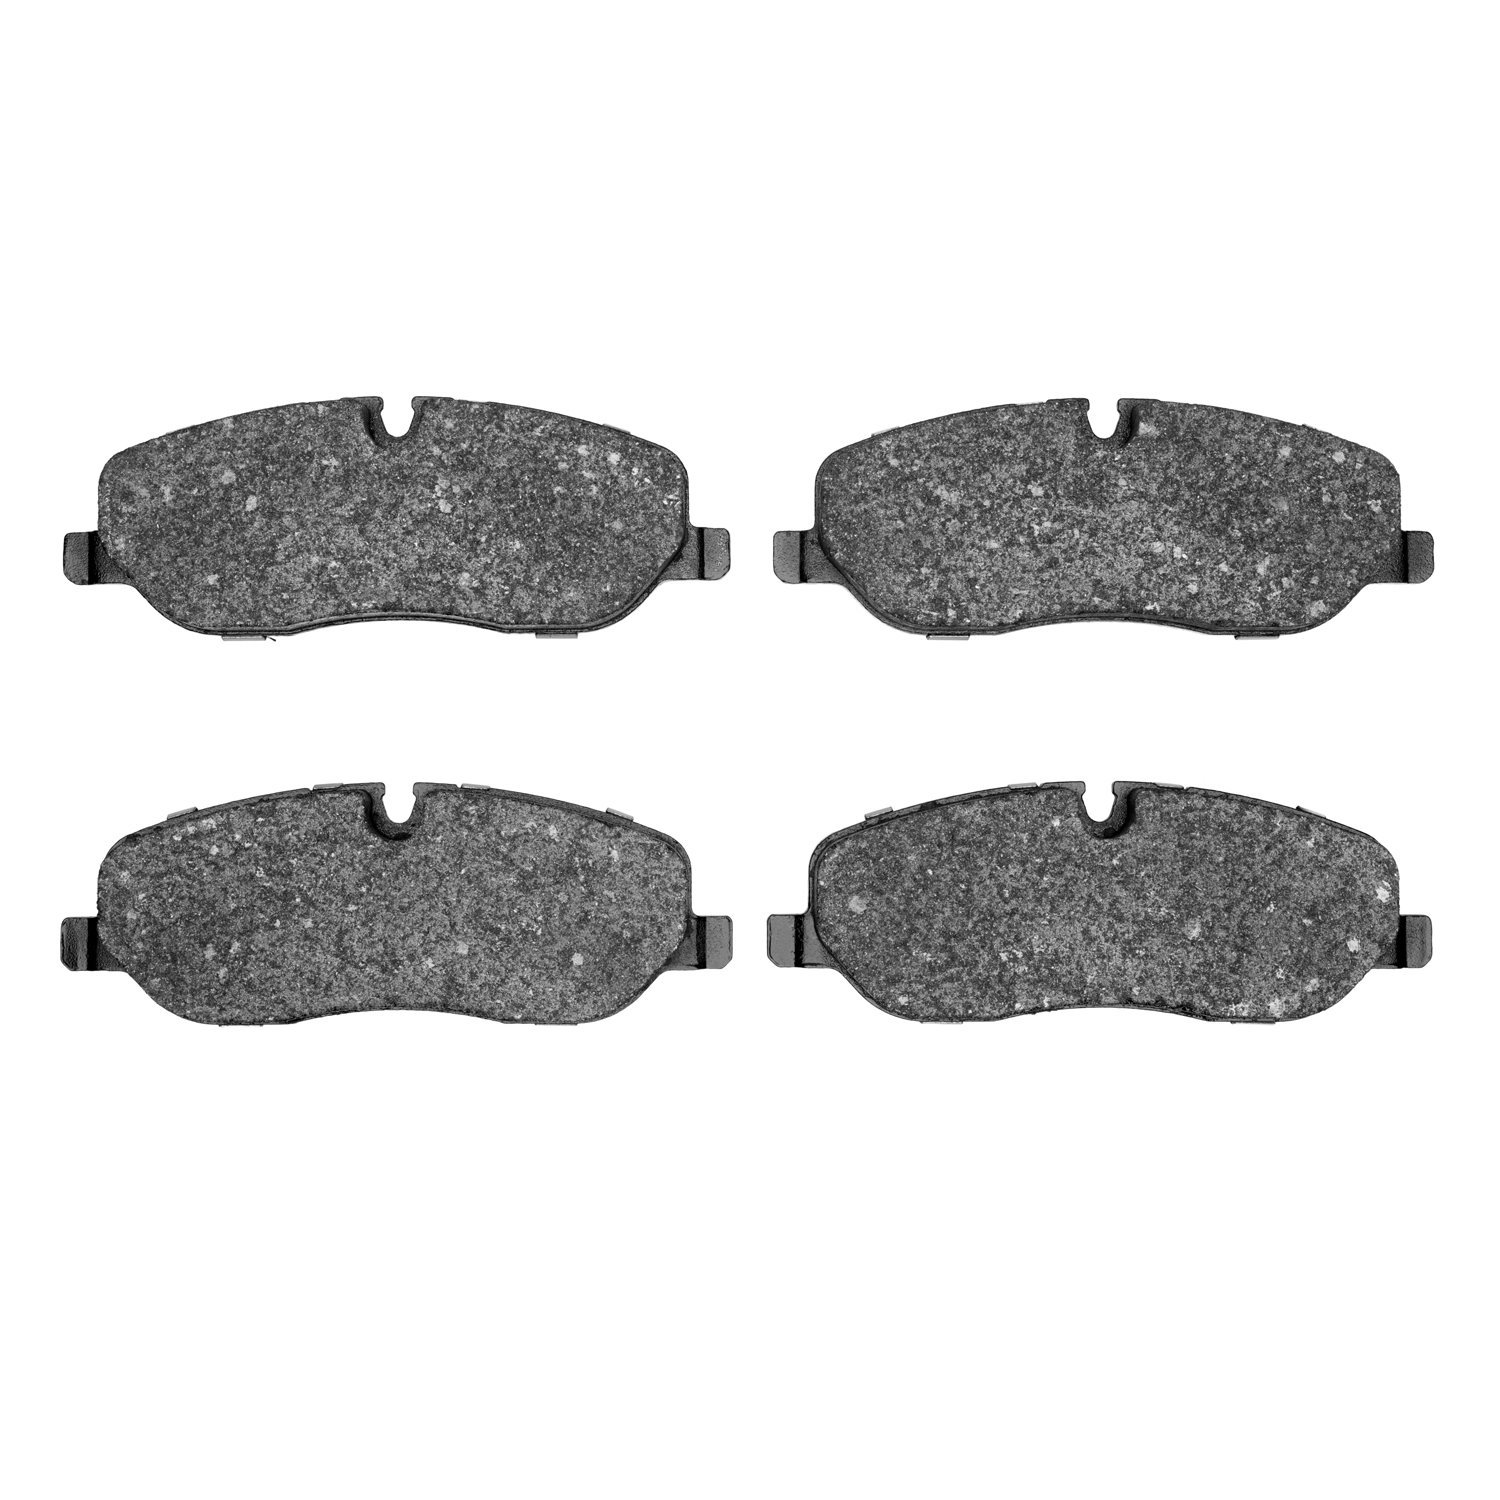 1600-1098-00 5000 Euro Ceramic Brake Pads, 2005-2009 Land Rover, Position: Front